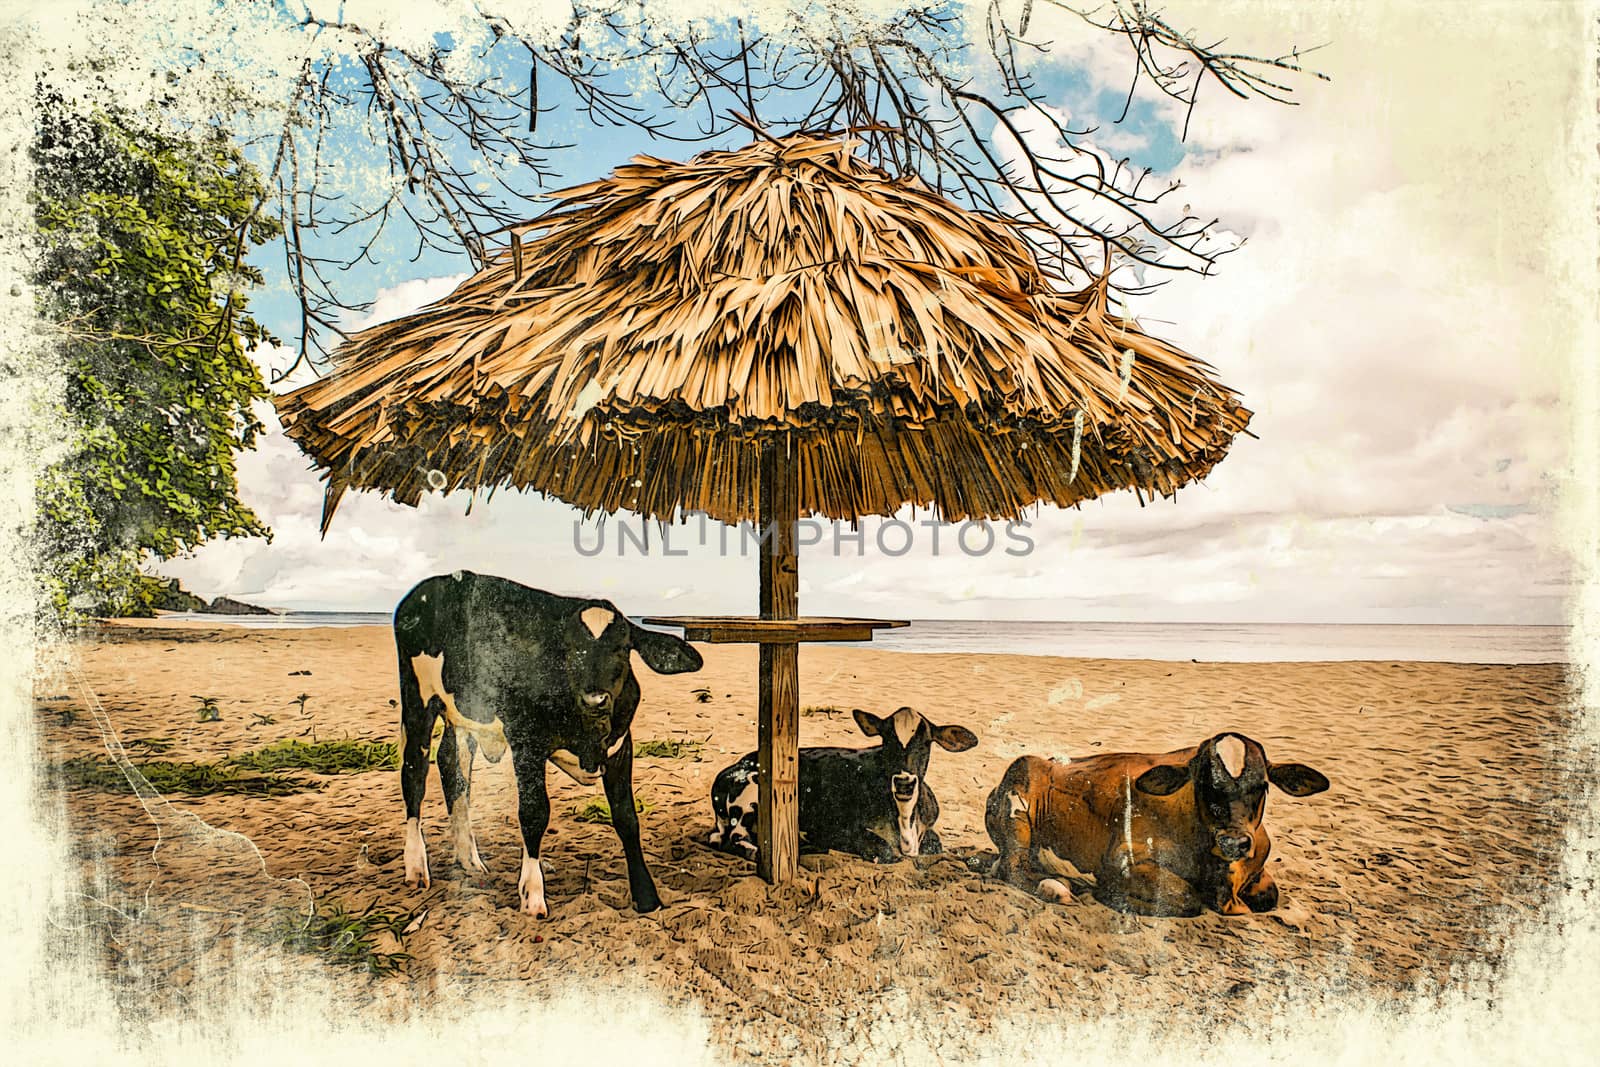 Vintage grunge graphics of cows on the beach